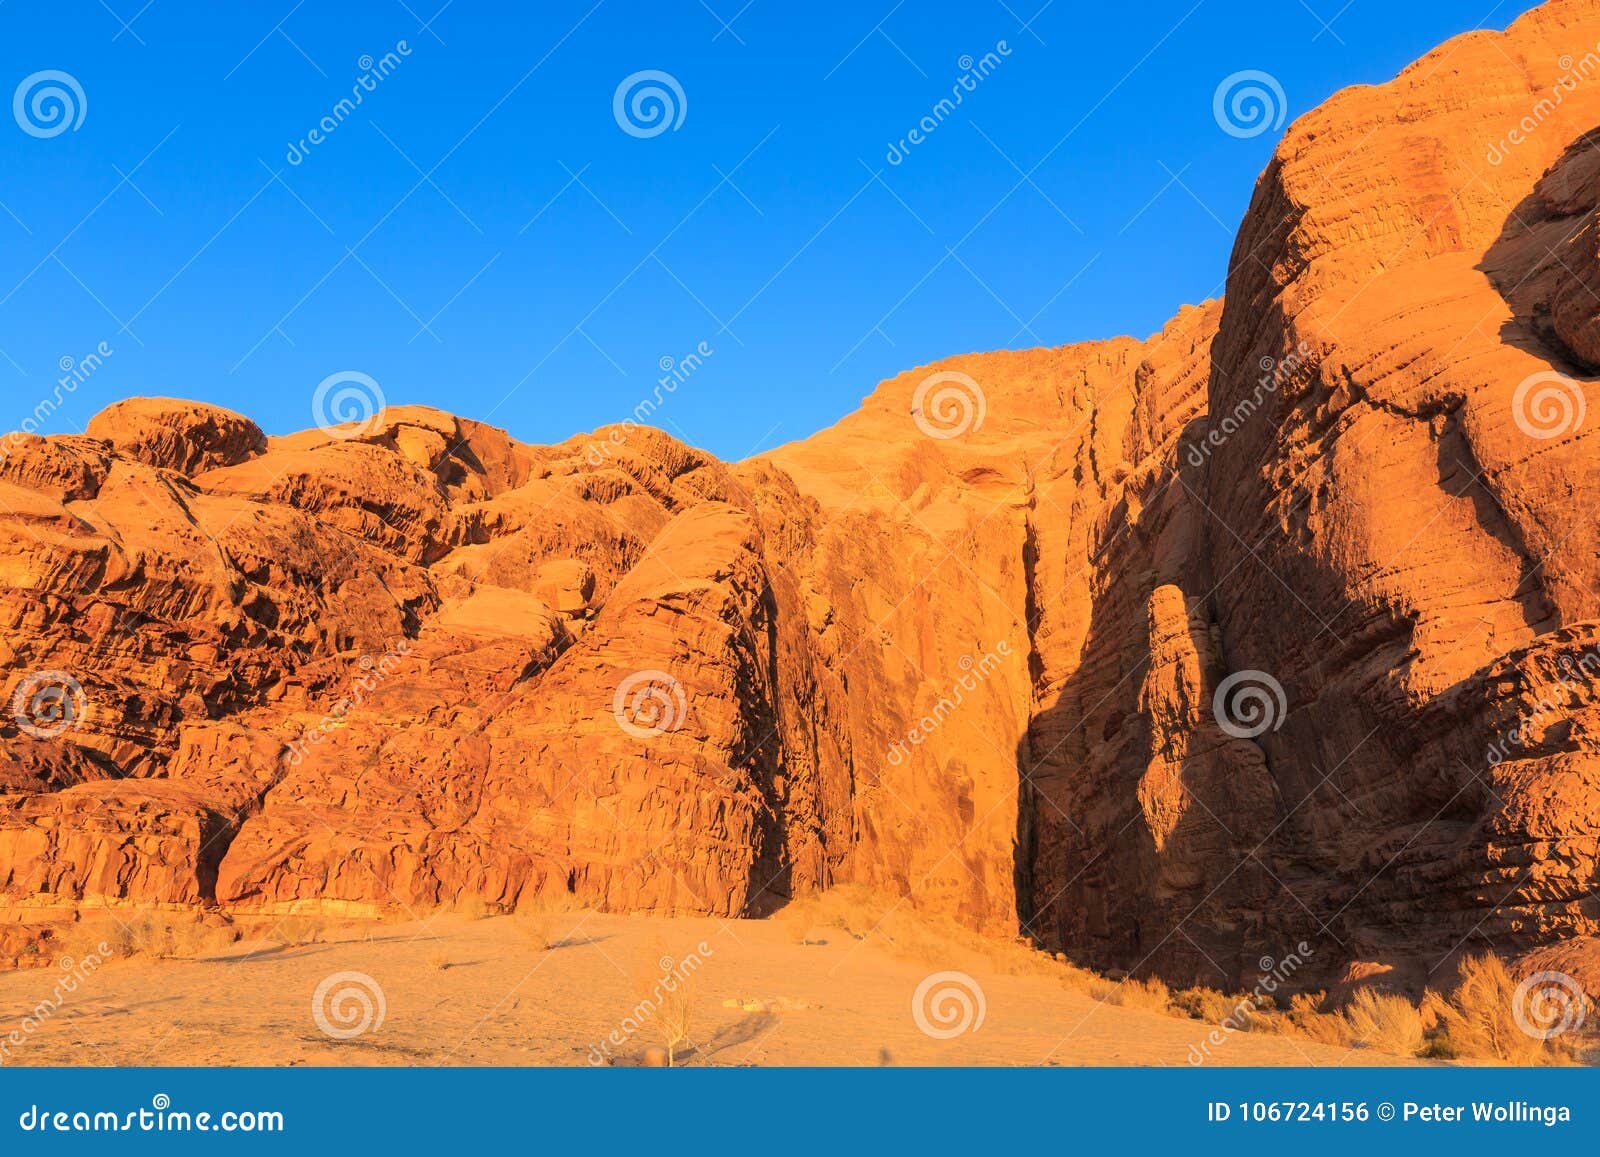 Scenic View of the Red and Yellow Colored Mountain Rocks in the Stock